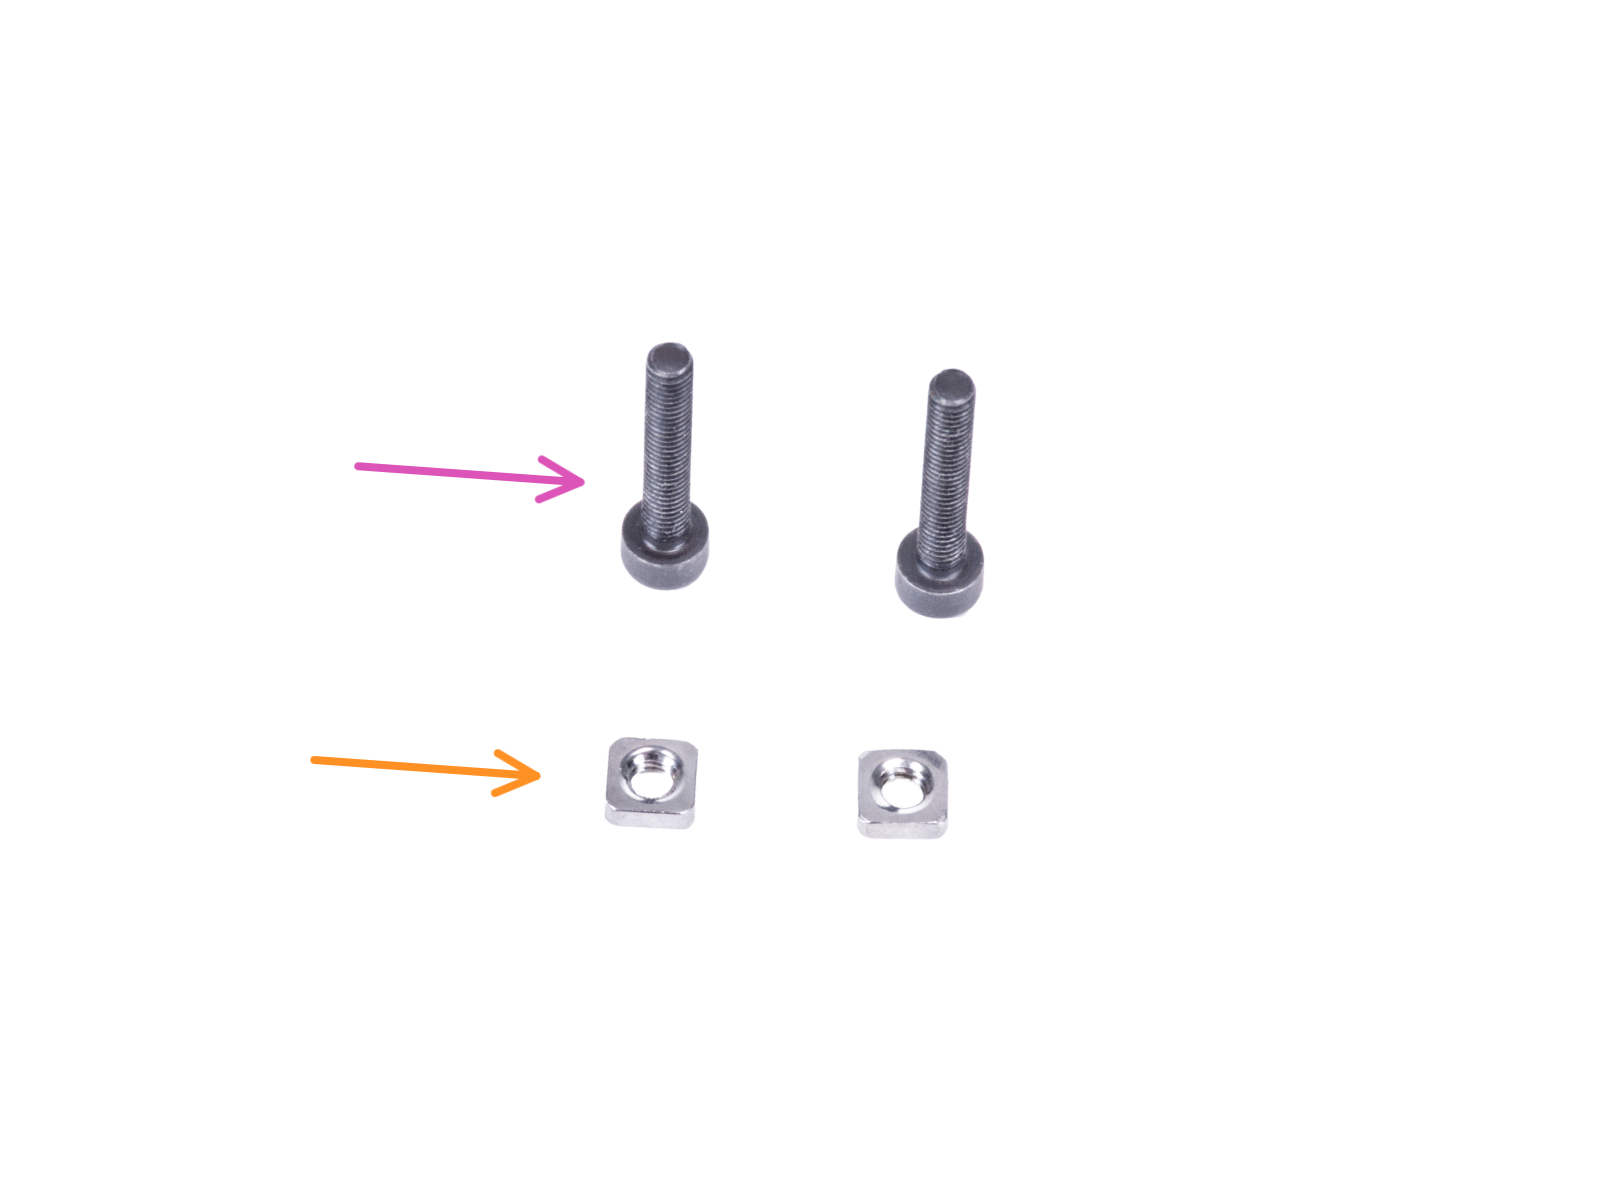 Covering the lock mechanism: parts preparation